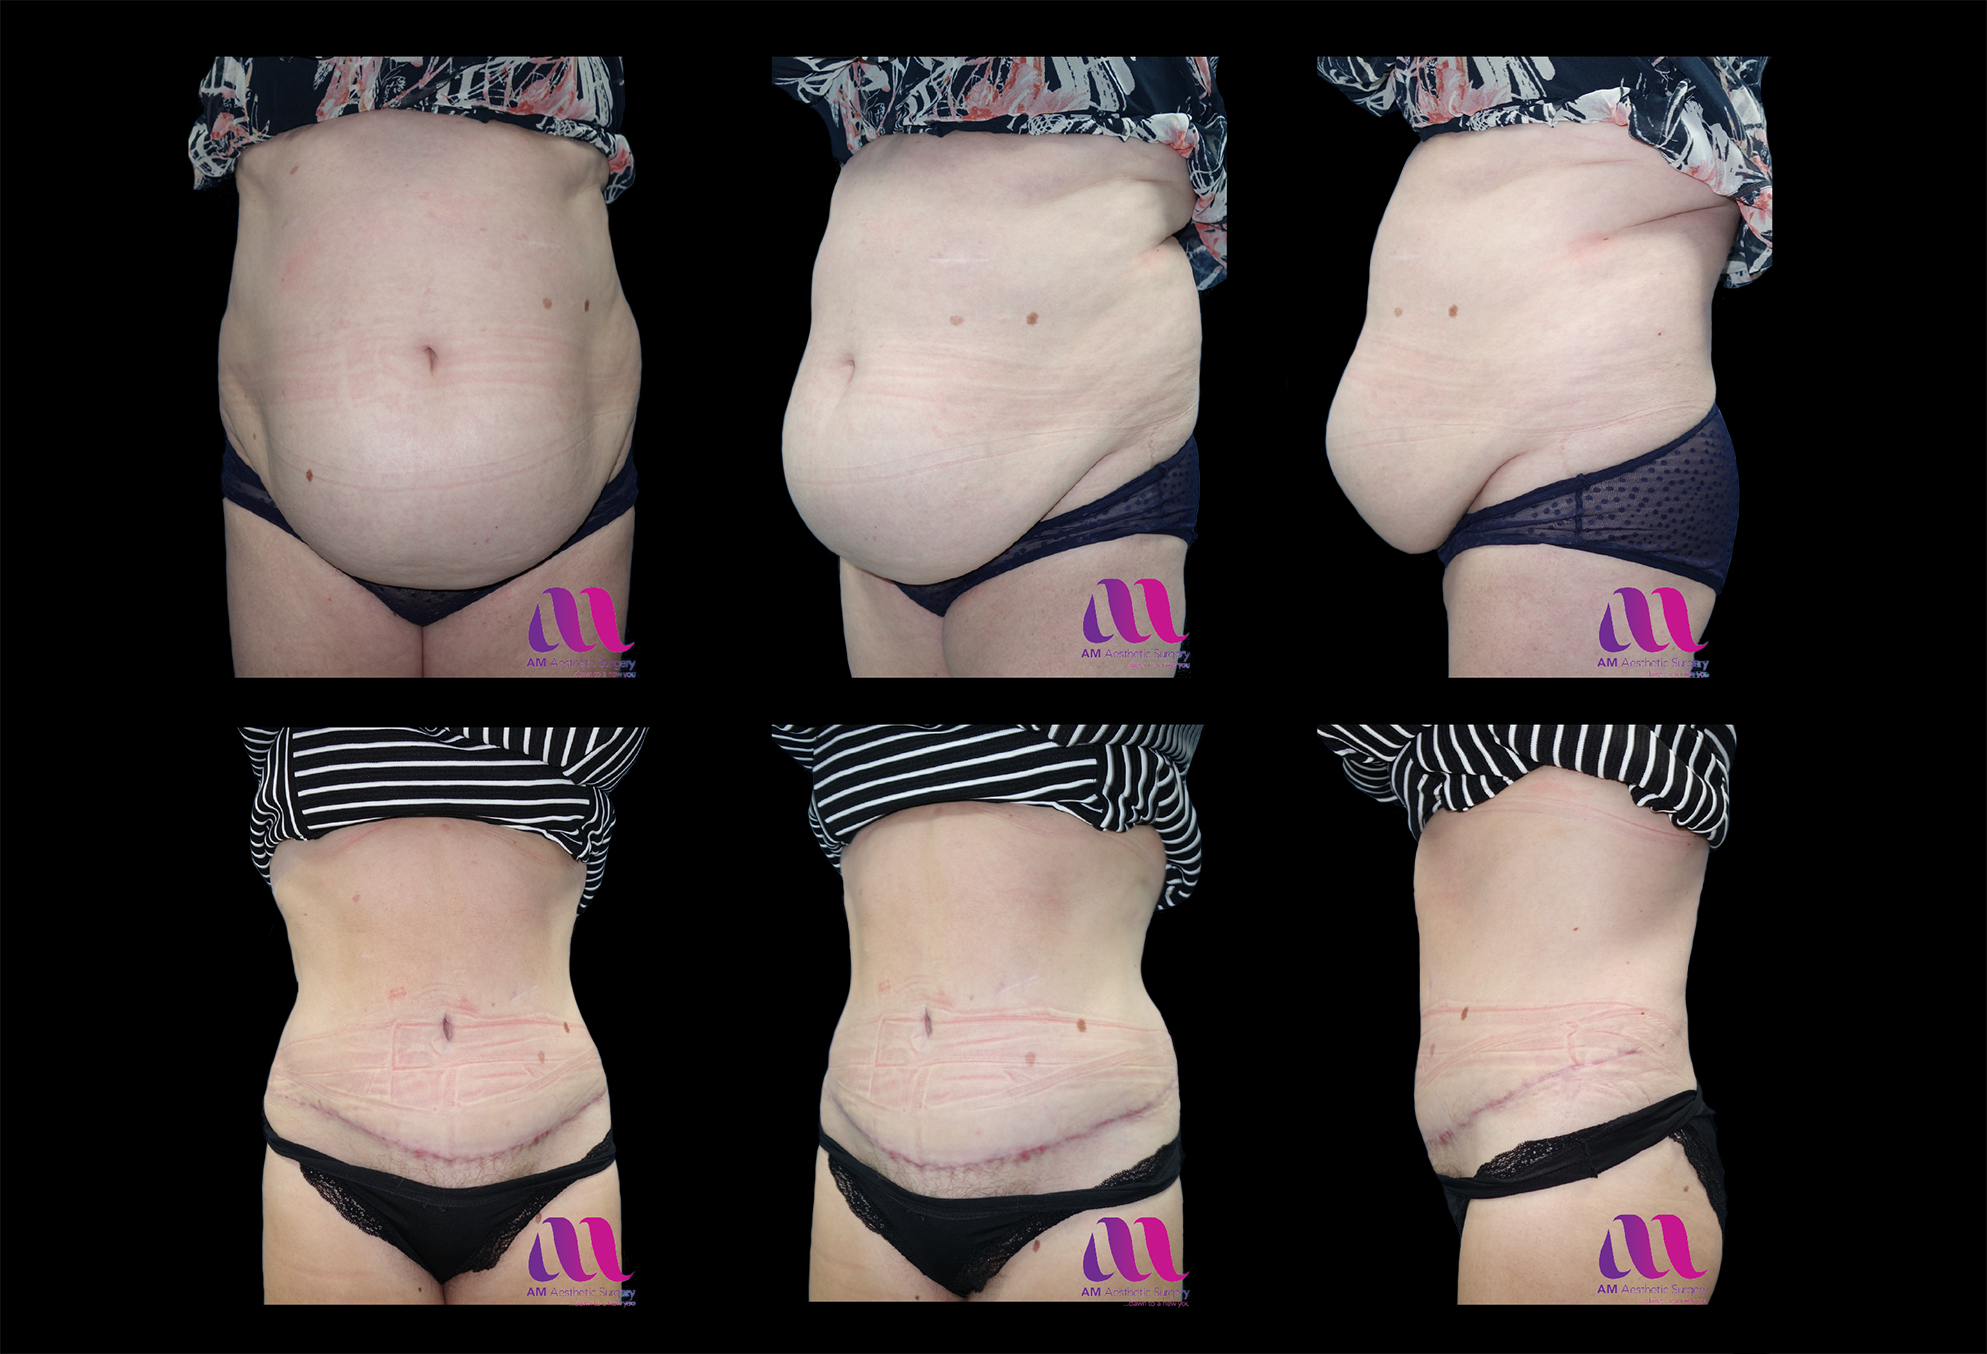 The goal of a tummy tuck (abdominoplasty) is to restore the